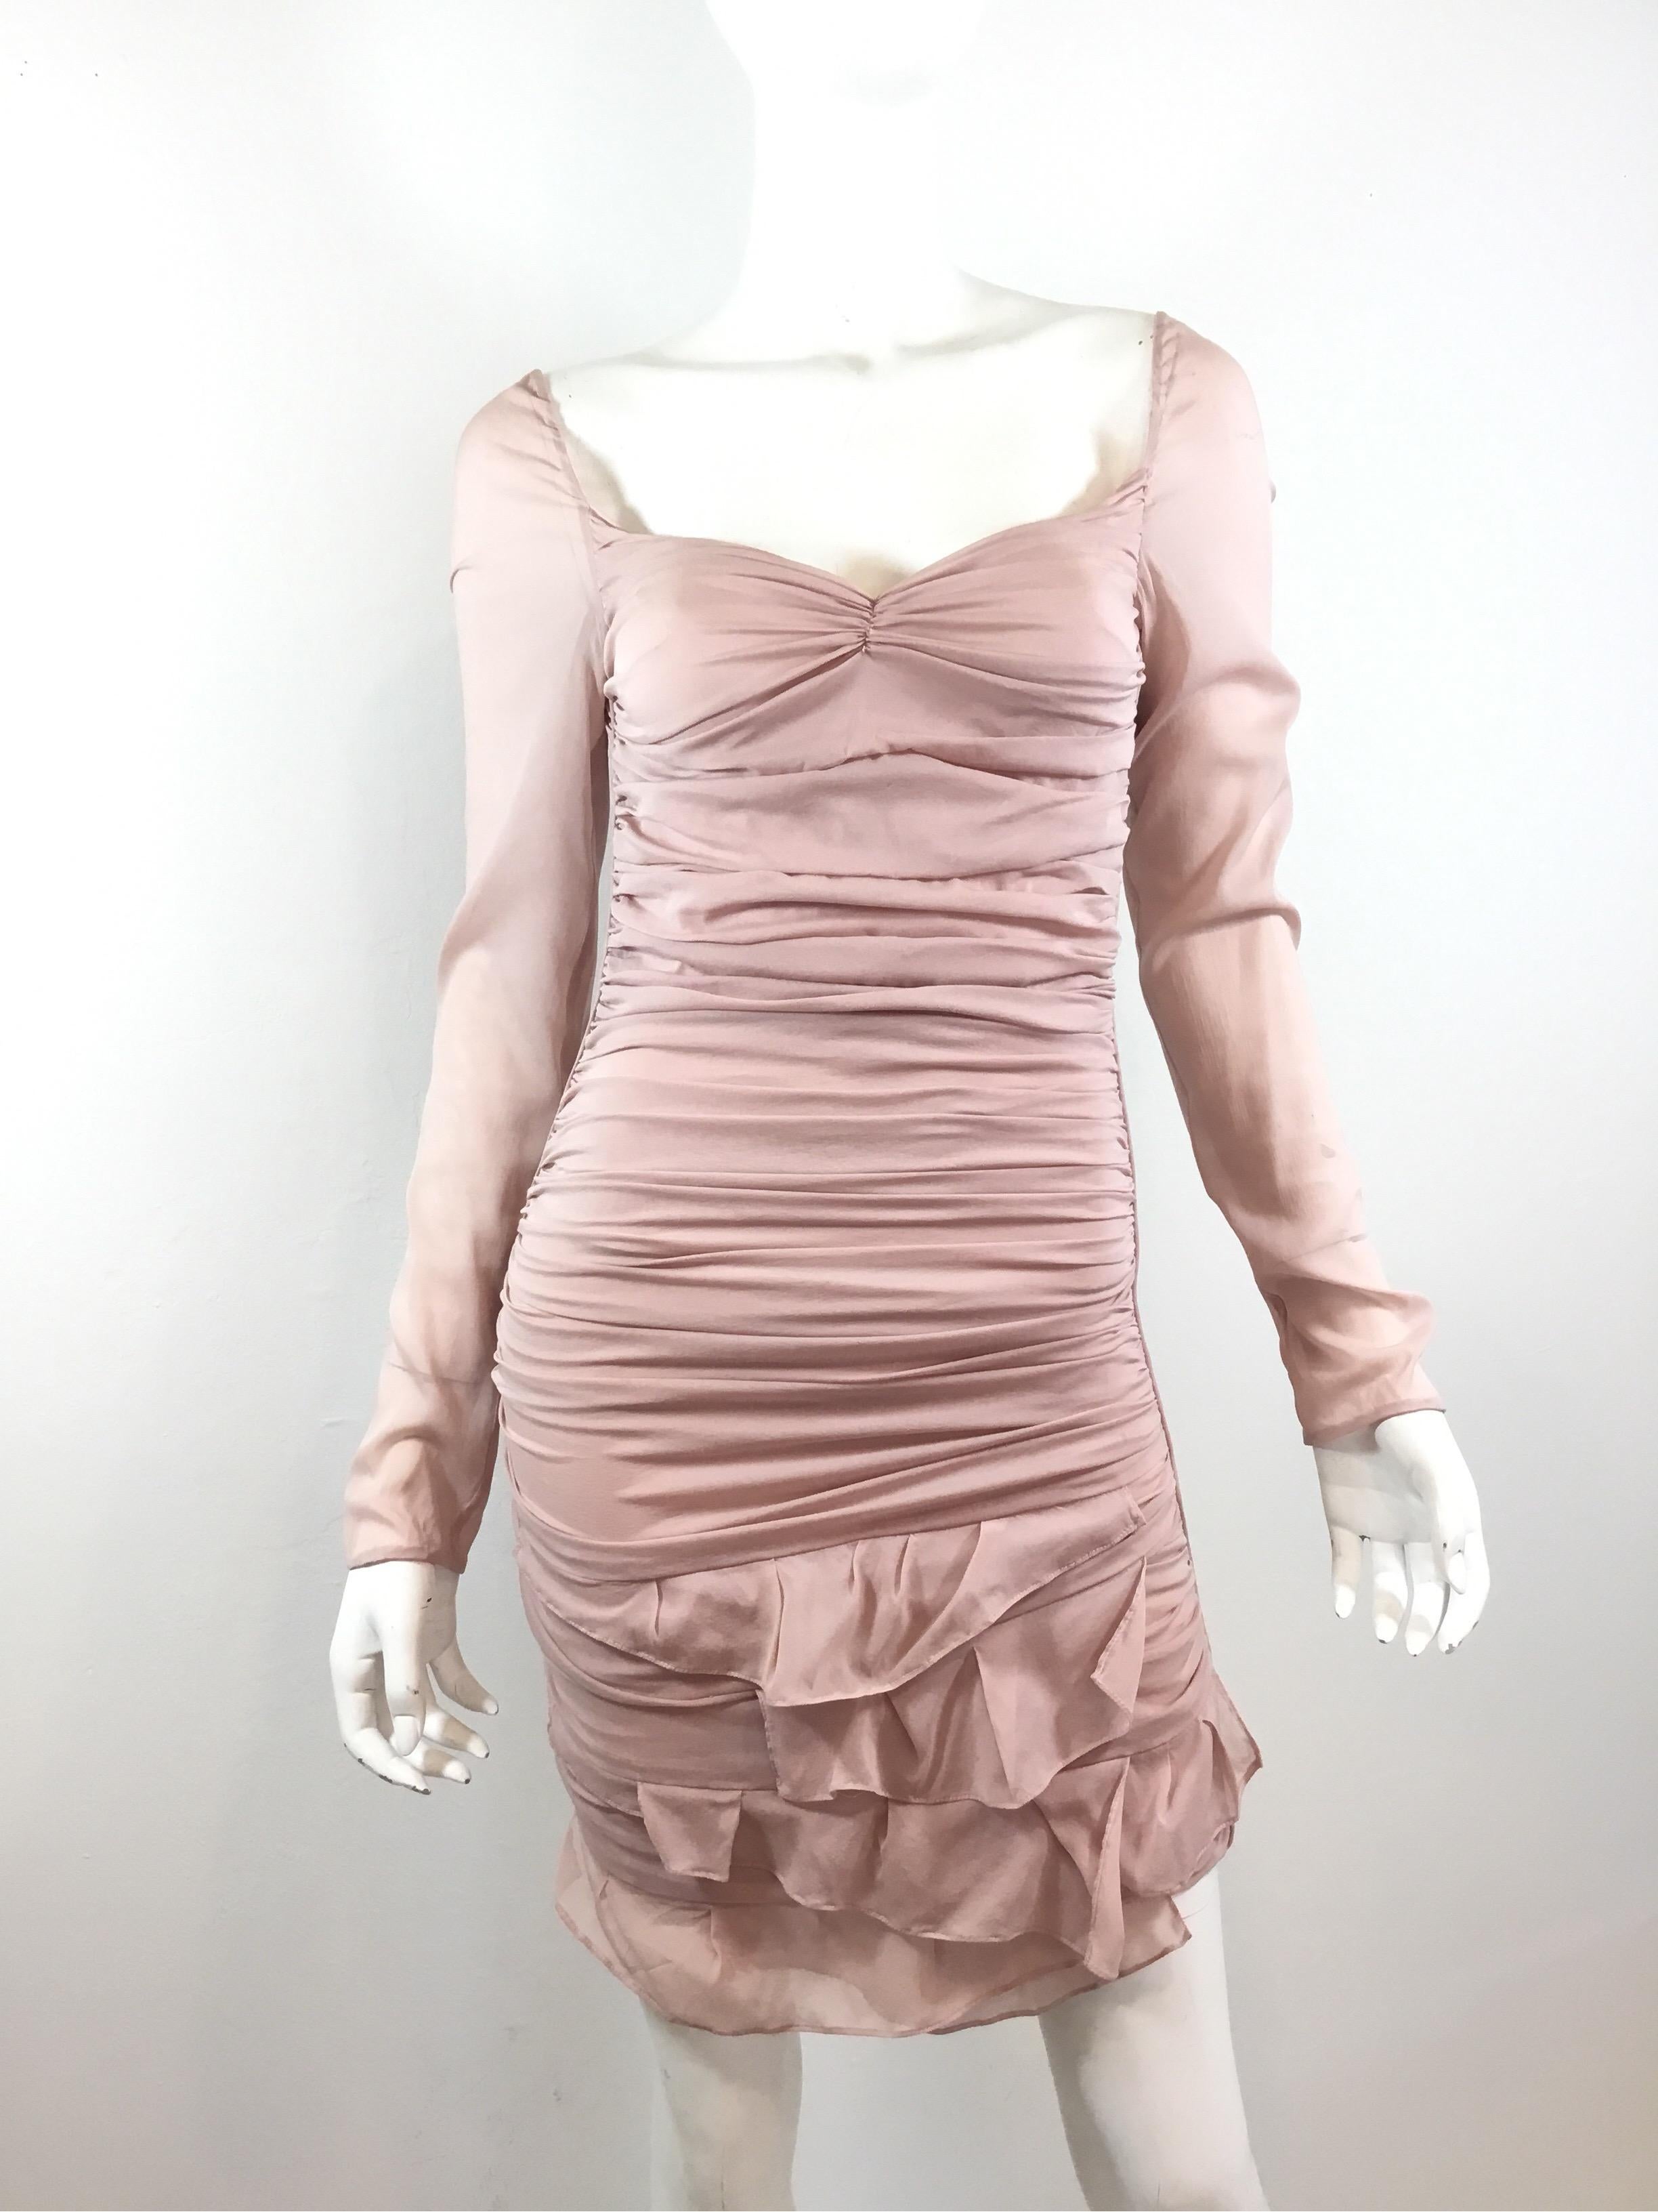 Gorgeous Runway dress from Tom Ford for Gucci’s 2003 Spring collection. Dress is featured in a nude pink color, composed of  a silk and spandex blend, labeled Size 38, made in Italy. Dress has an open back with strappy detail across the back and a